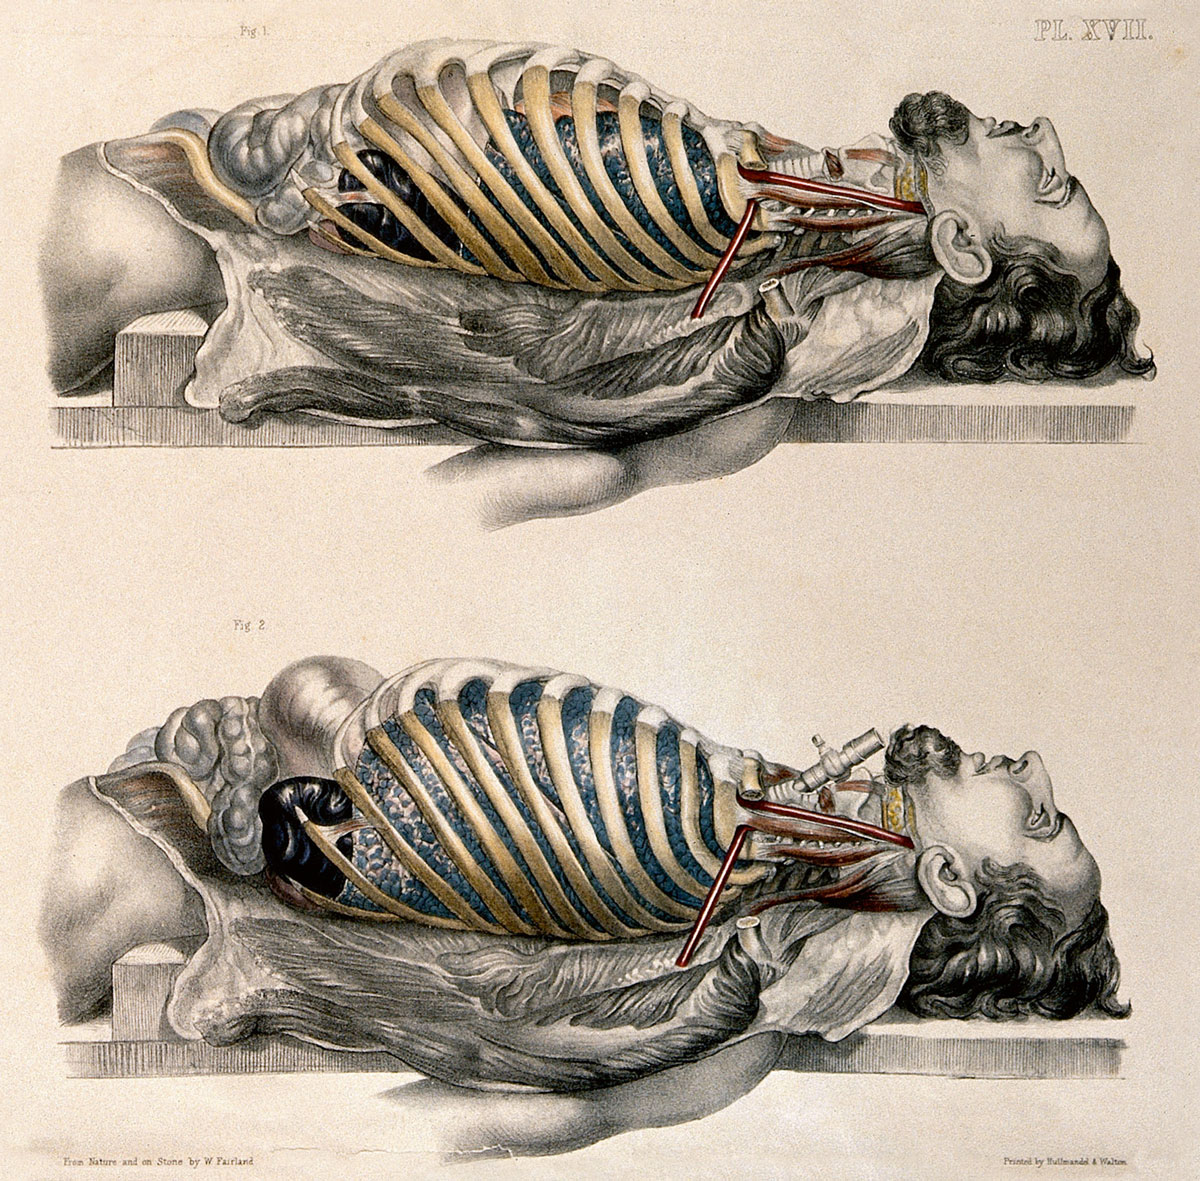 Lithograph from 1869 by William Fairland documenting the work of anatomist Francis Sibson. The two figures show the lungs after breathing out (above) and after breathing in (below). Courtesy Wellcome Library.